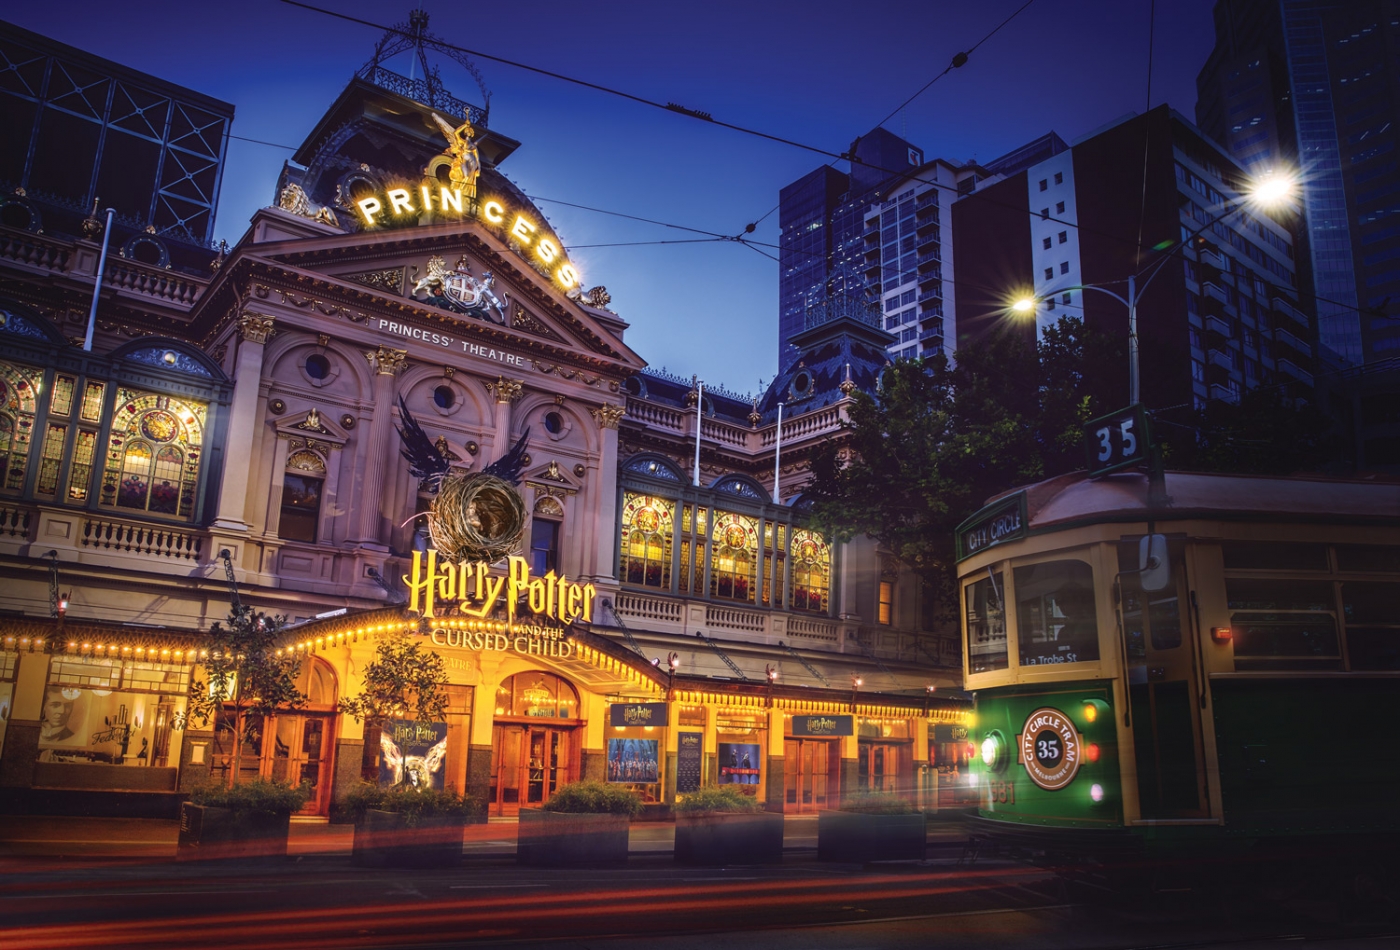 Harry Potter and The Cursed Child, Princess Theatre